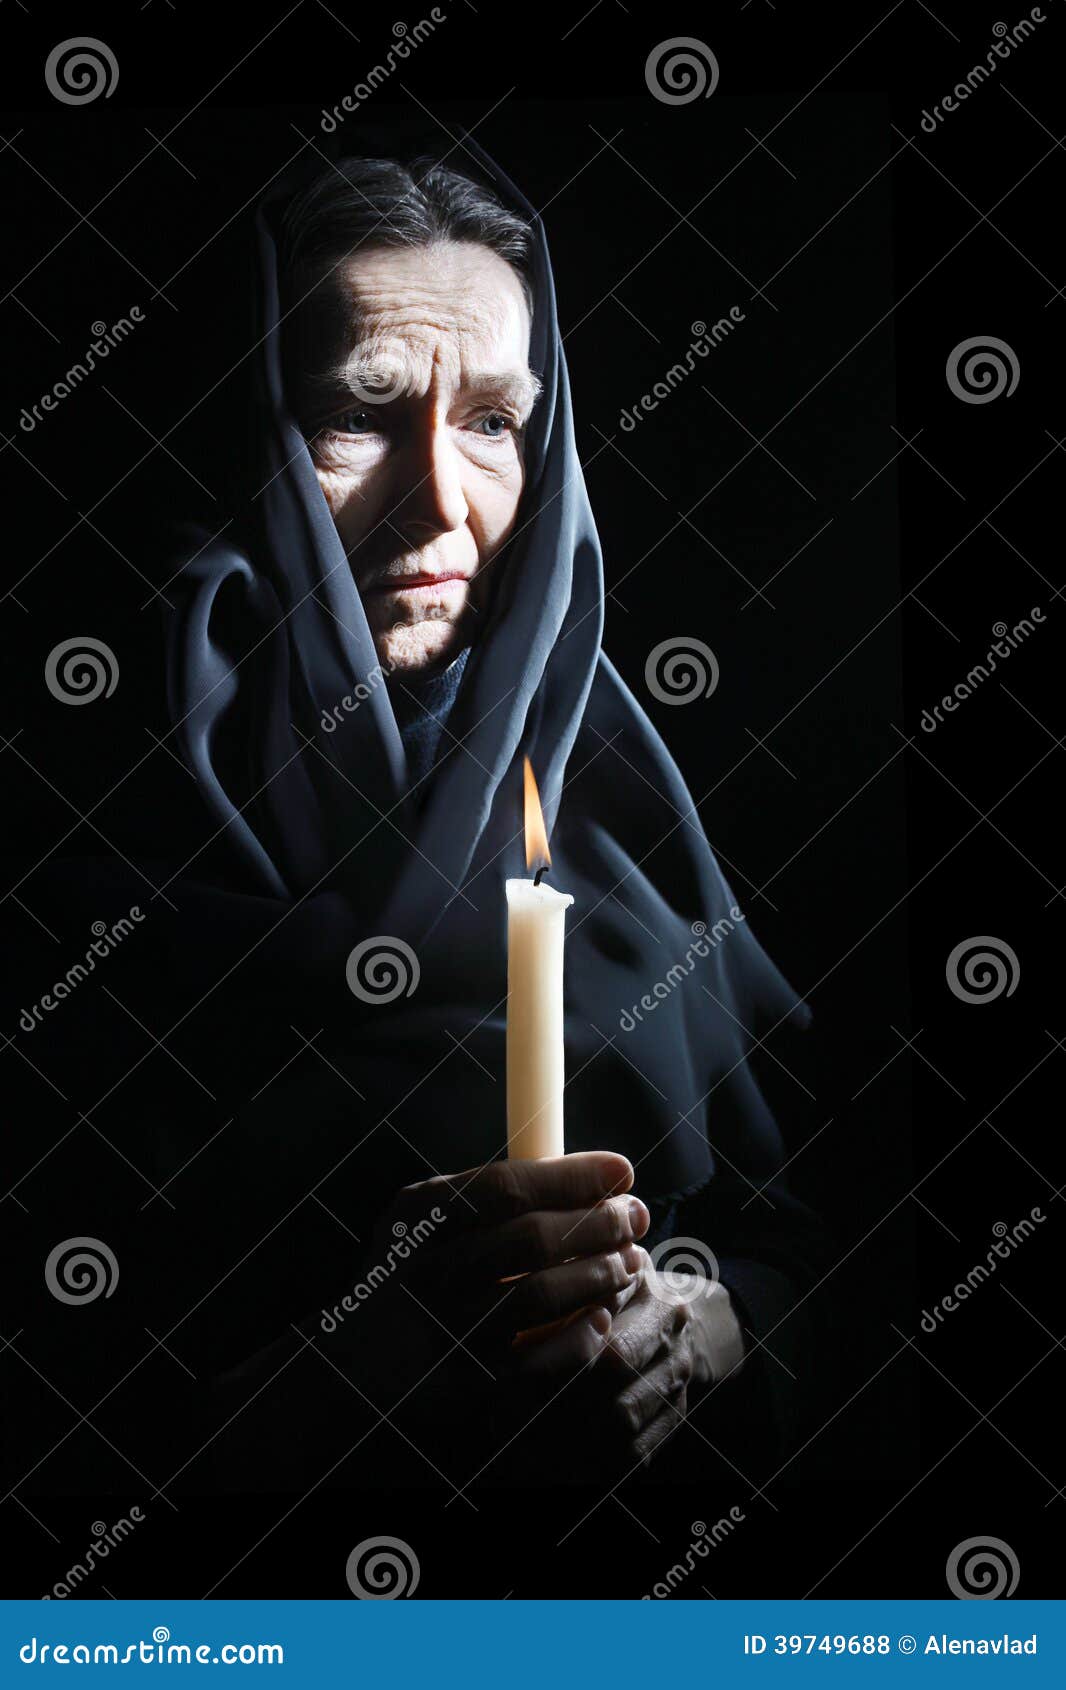 sad old woman senior in sorrow with candle